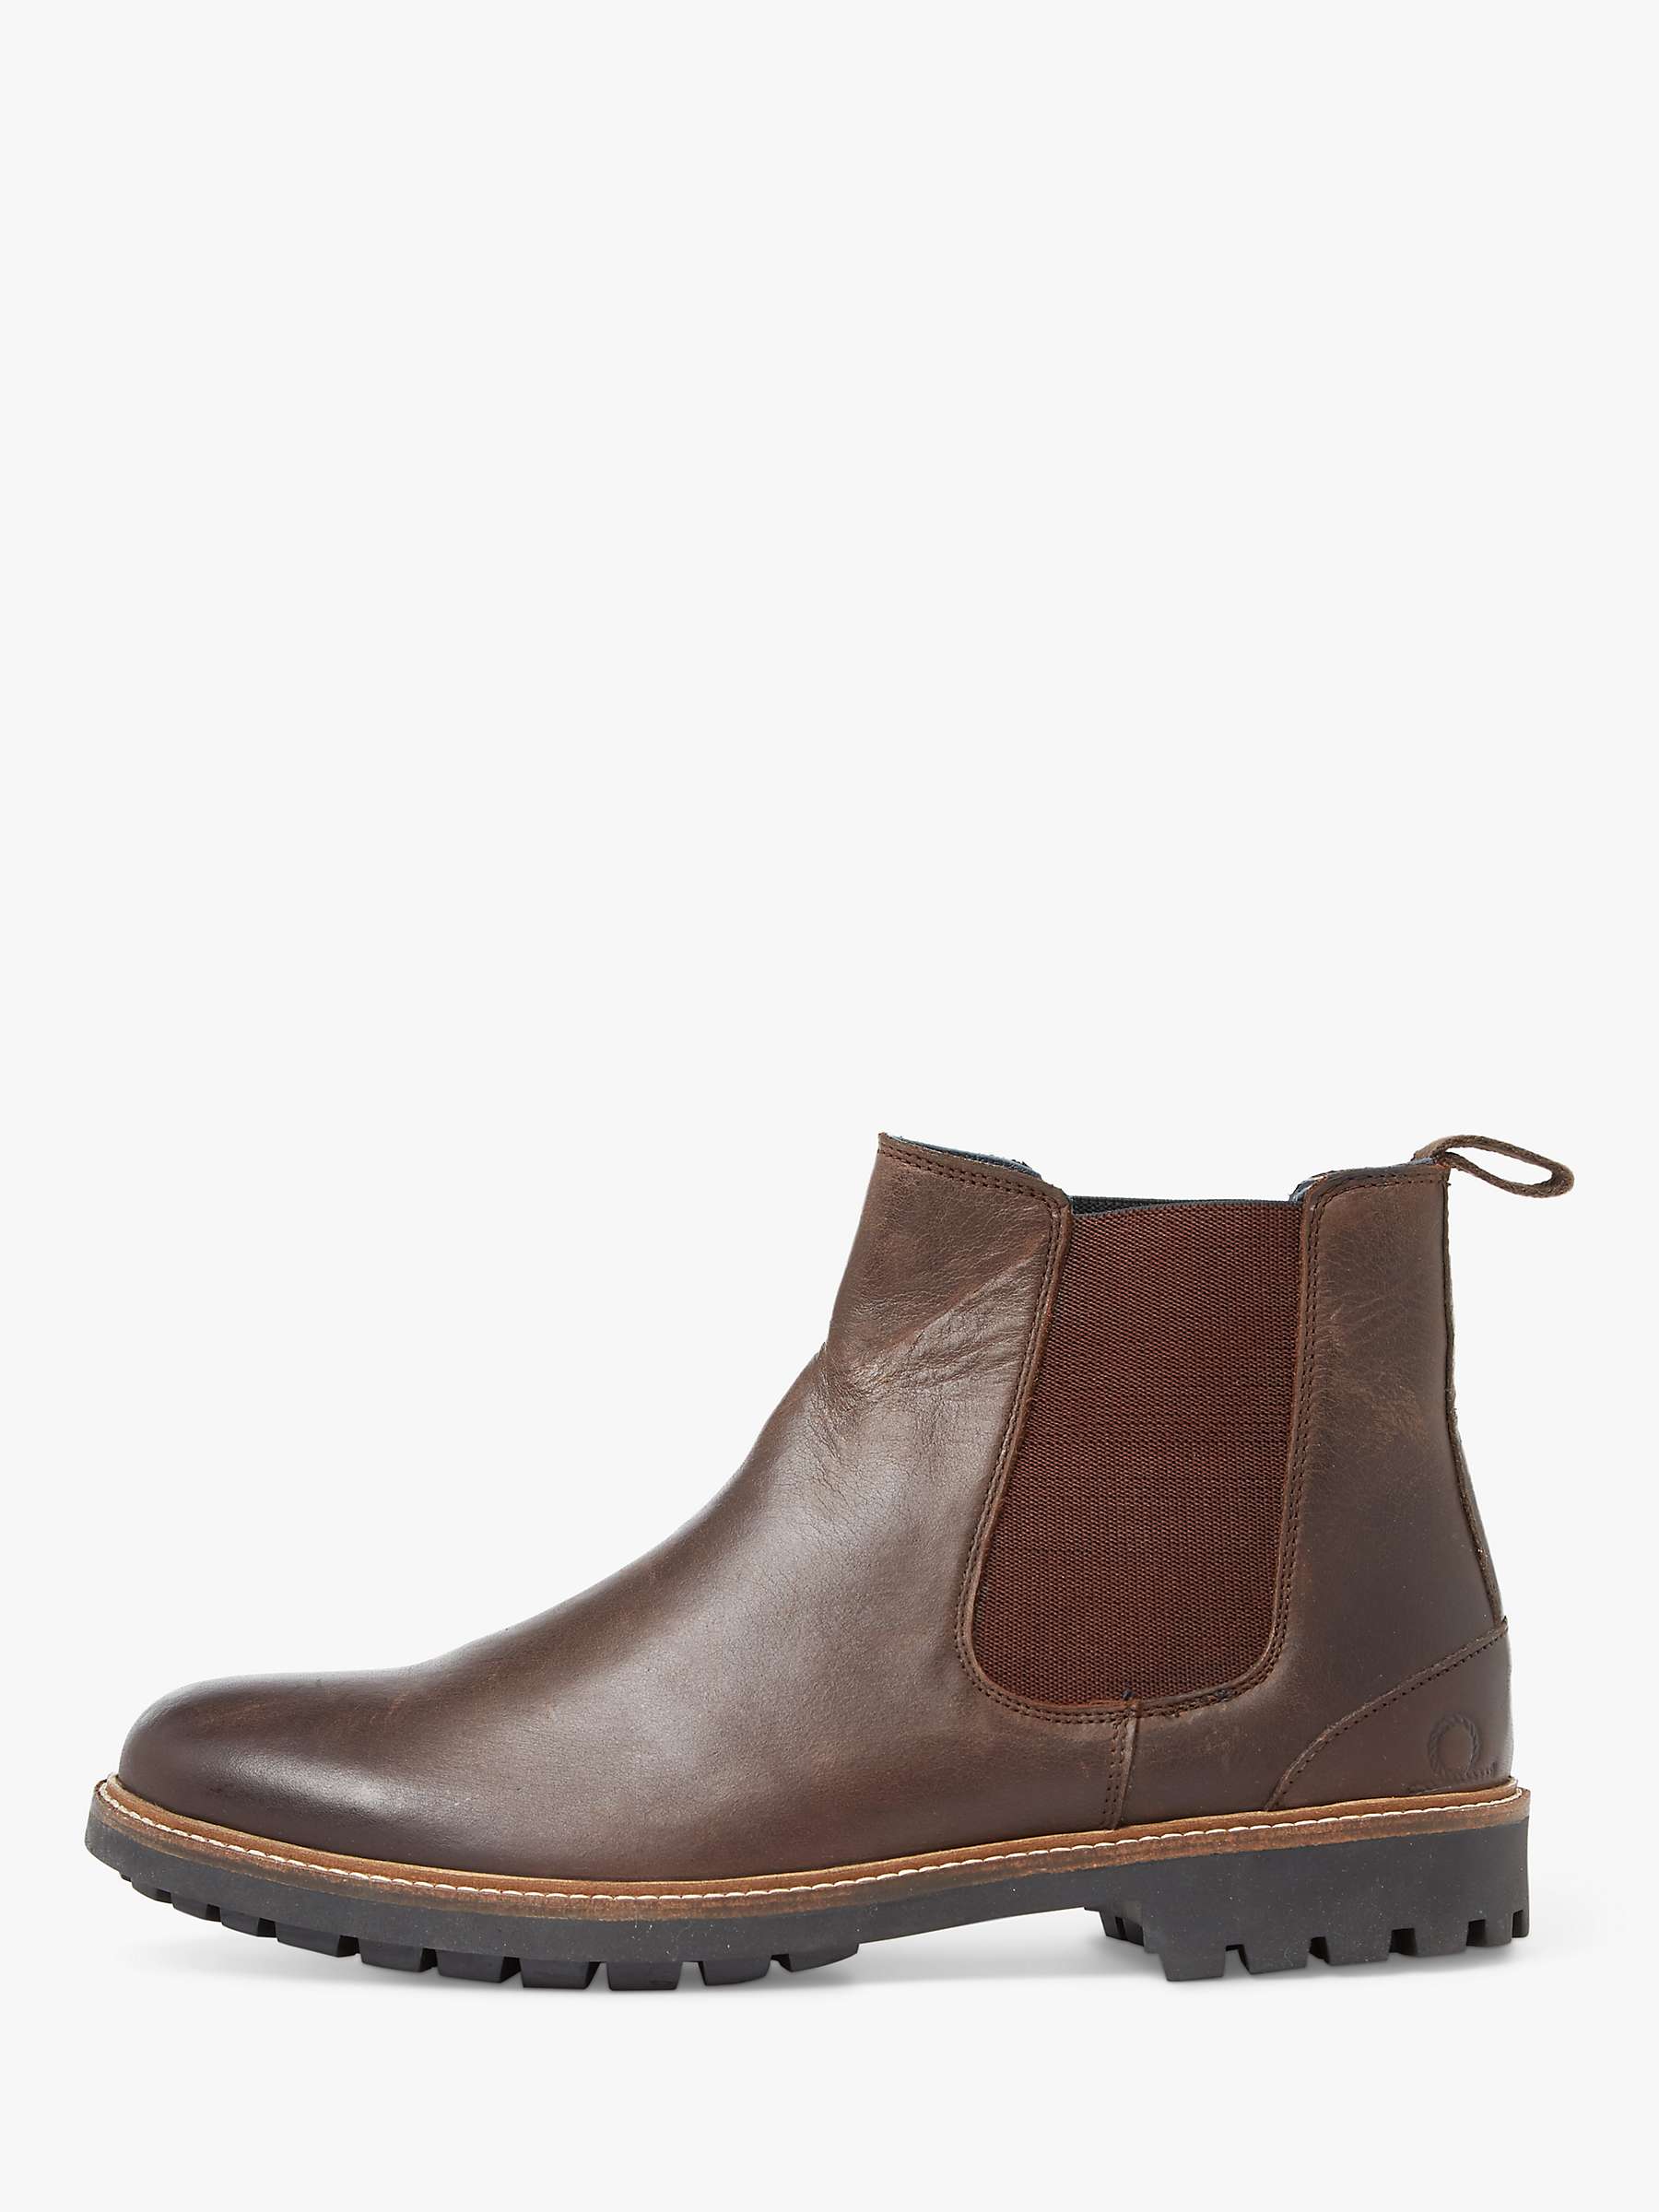 Buy Chatham Chirk Leather Chelsea Boots, Brown Online at johnlewis.com